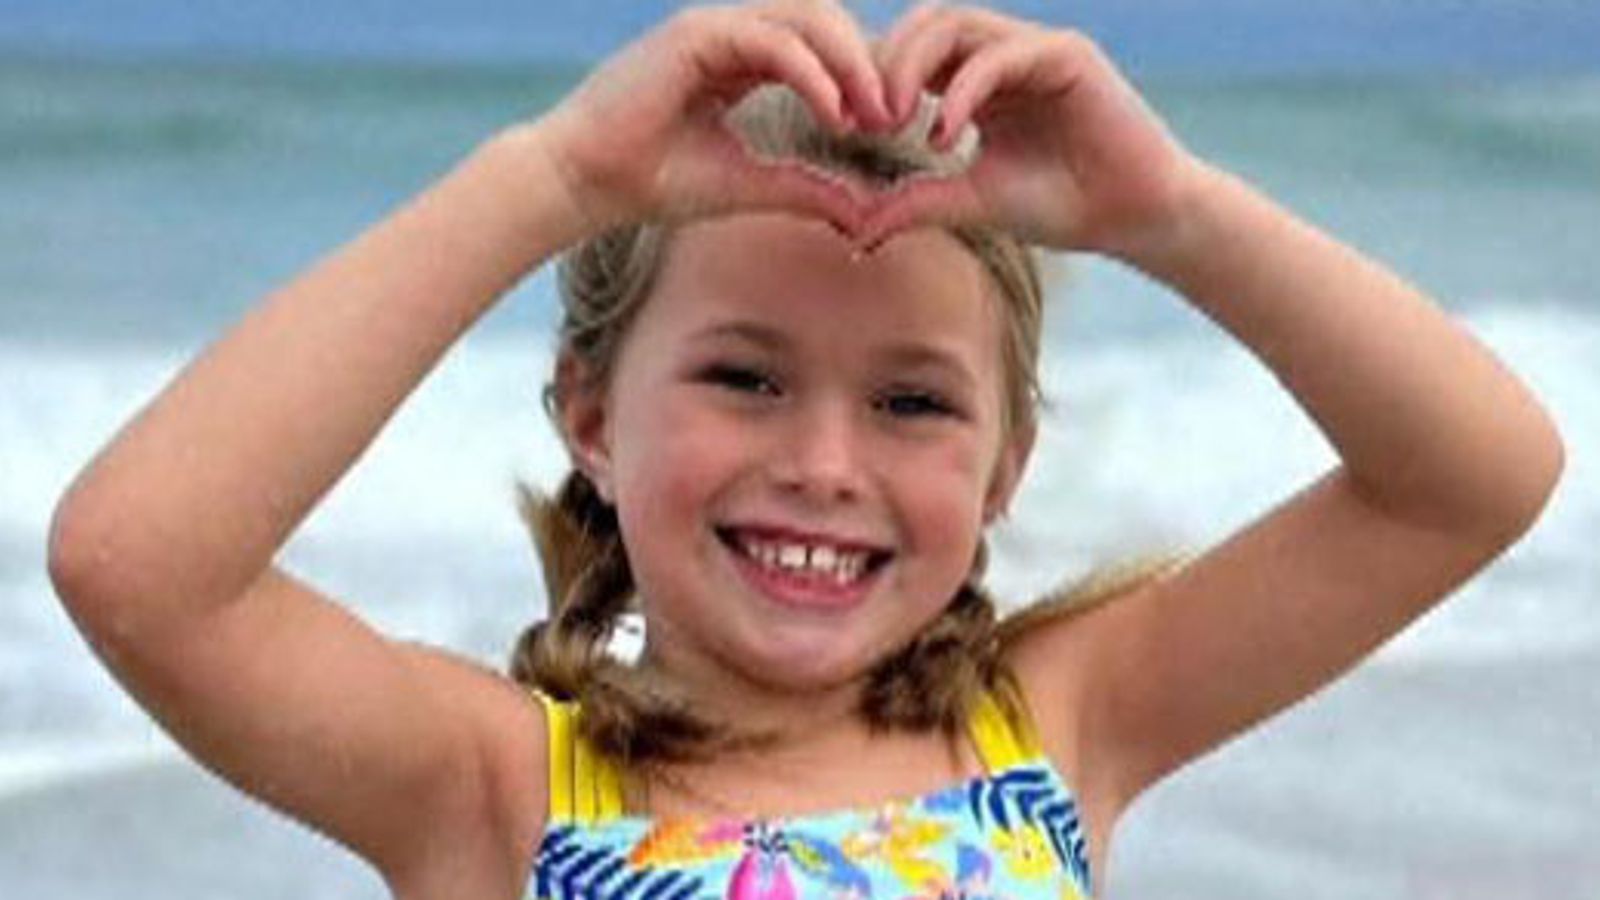 Sloan Mattingly: Parents of girl who died after being buried by sand set up campaign to prevent similar tragedies